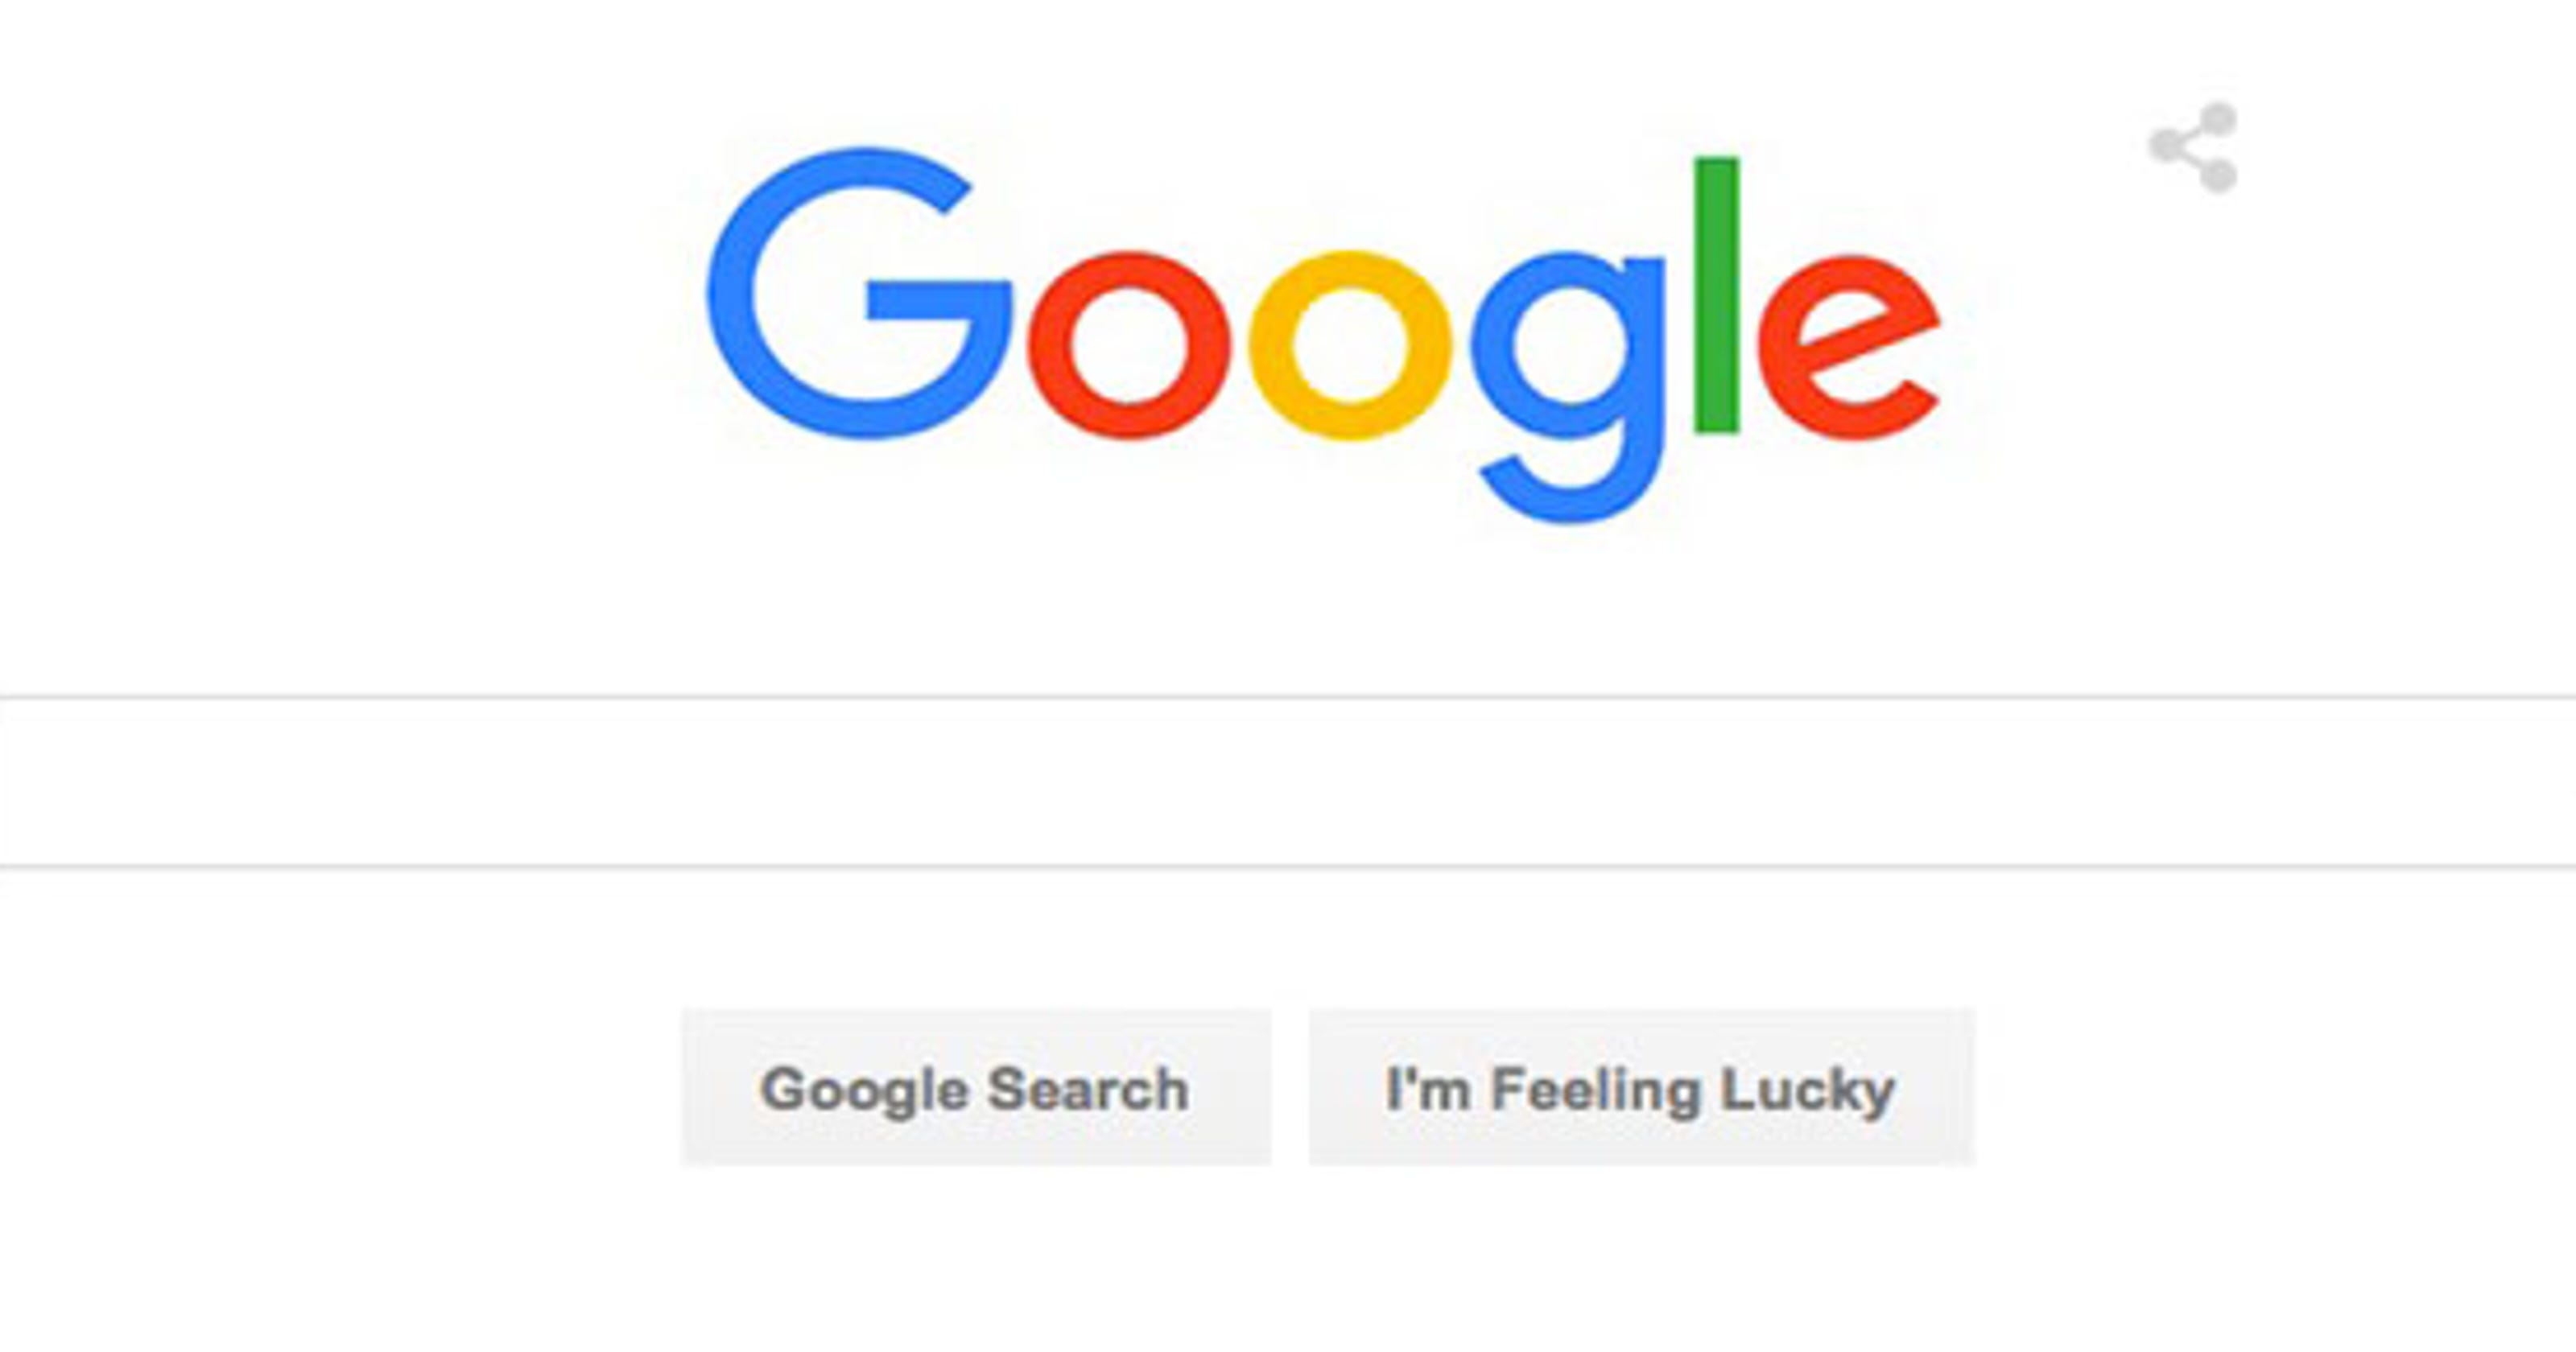 google-unveils-new-logo-with-emphasis-on-apps-devices